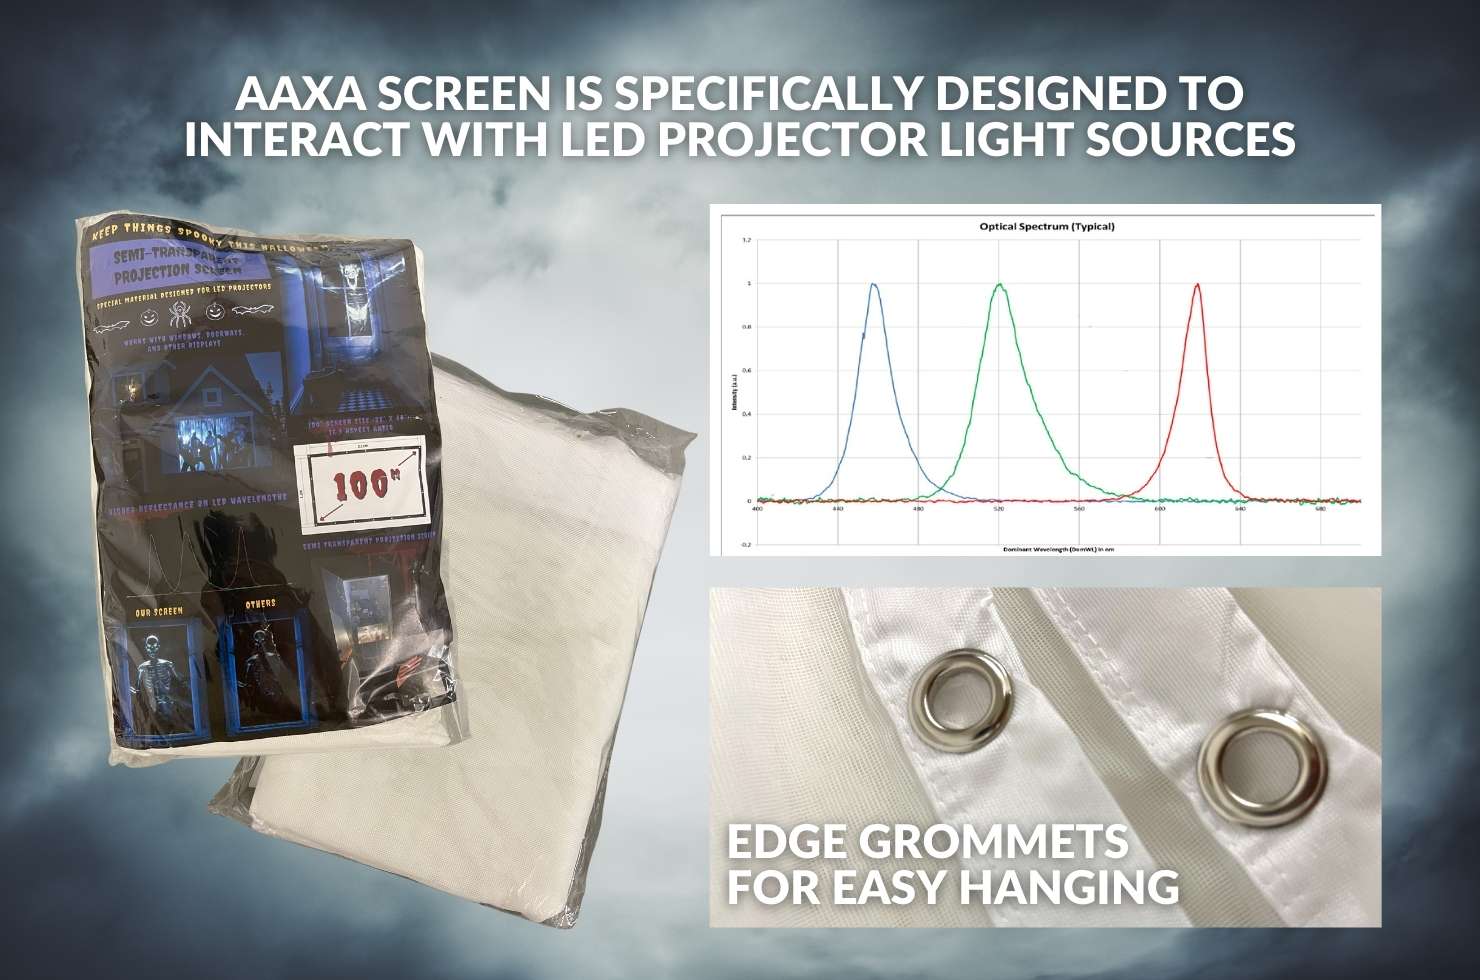 AAXA's screen is designed to work better with LED projector light sources - graph showing what light spectrum is captured.